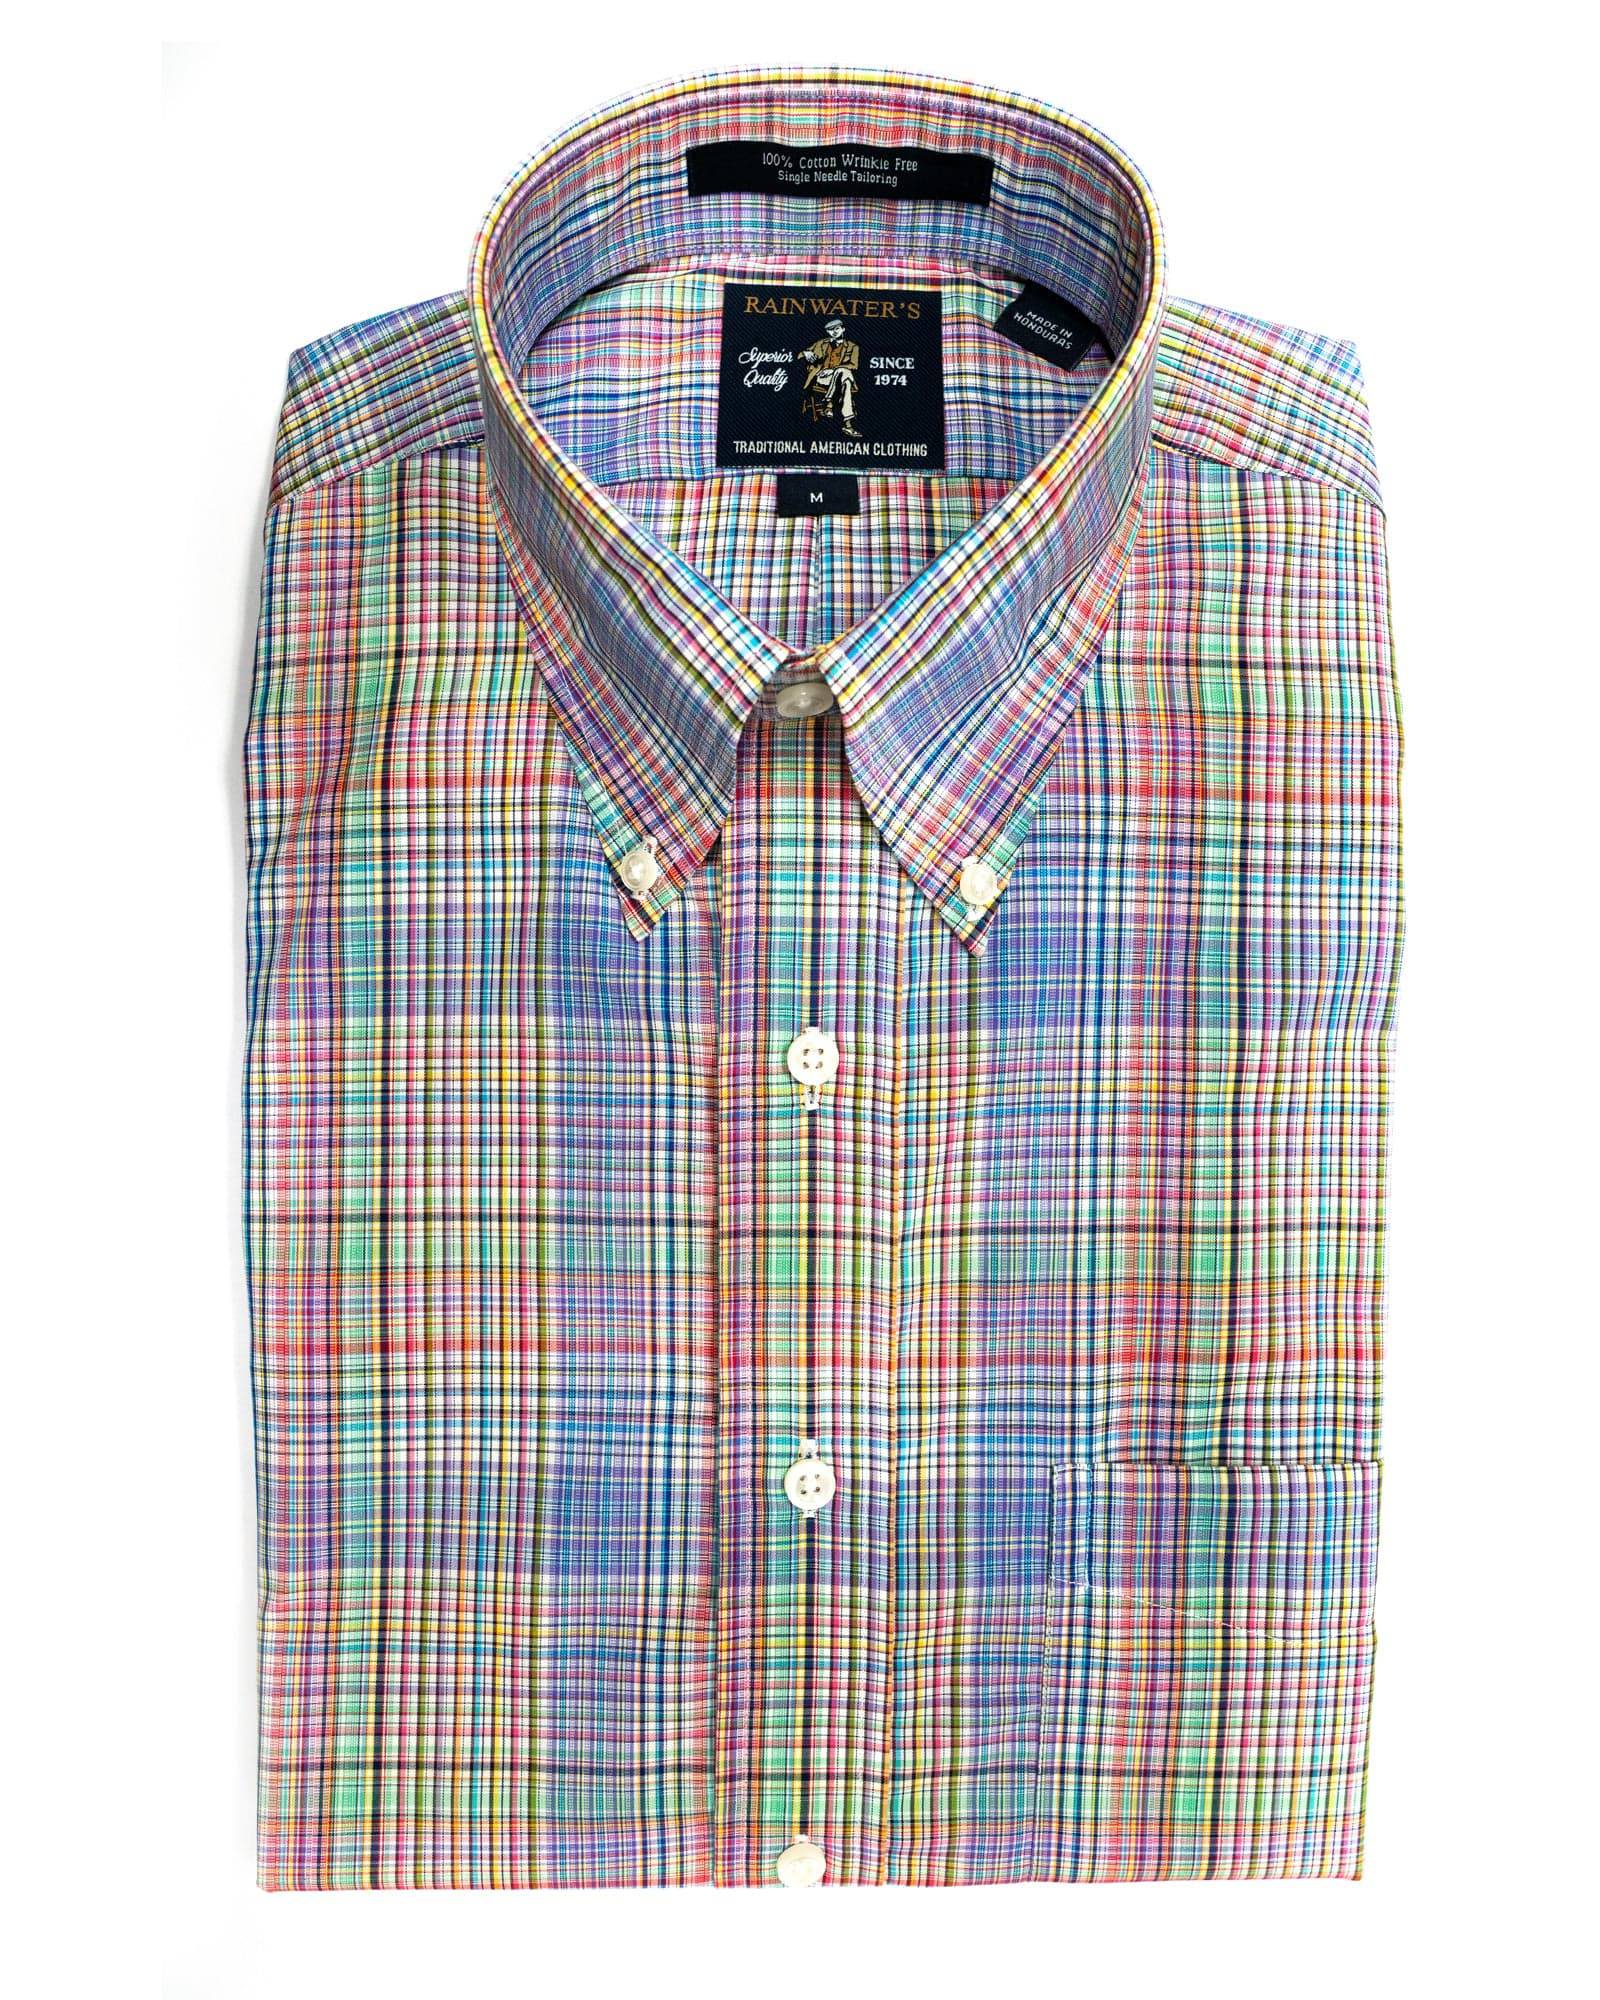 Rainwater's Purple with Green & Blue Plaid Button Up Shirt - Rainwater's Men's Clothing and Tuxedo Rental